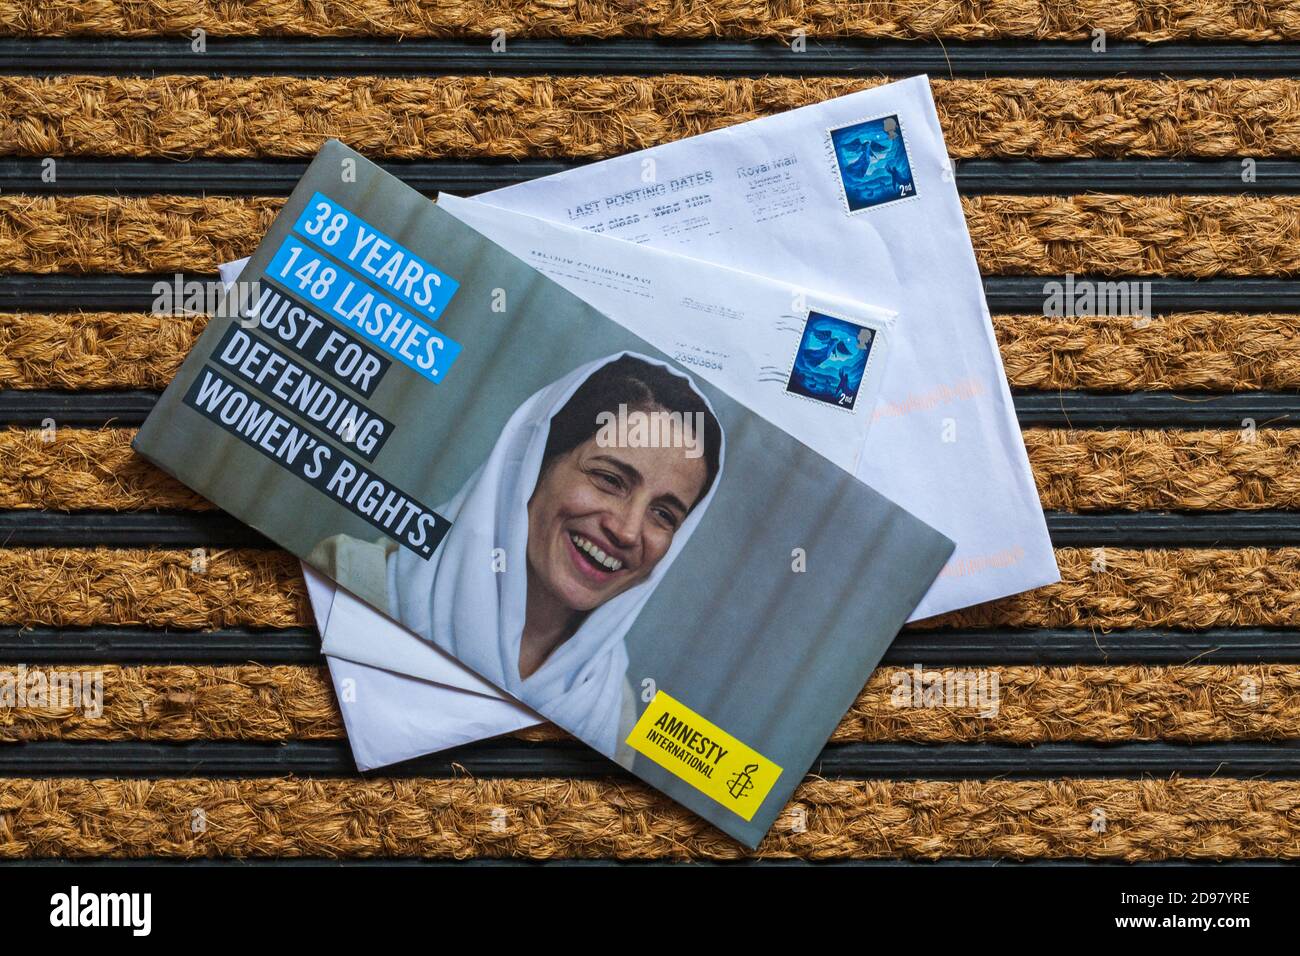 Post mail on doormat - charity appeal, Amnesty International 38 years 148 lashes just for defending women's rights Stock Photo